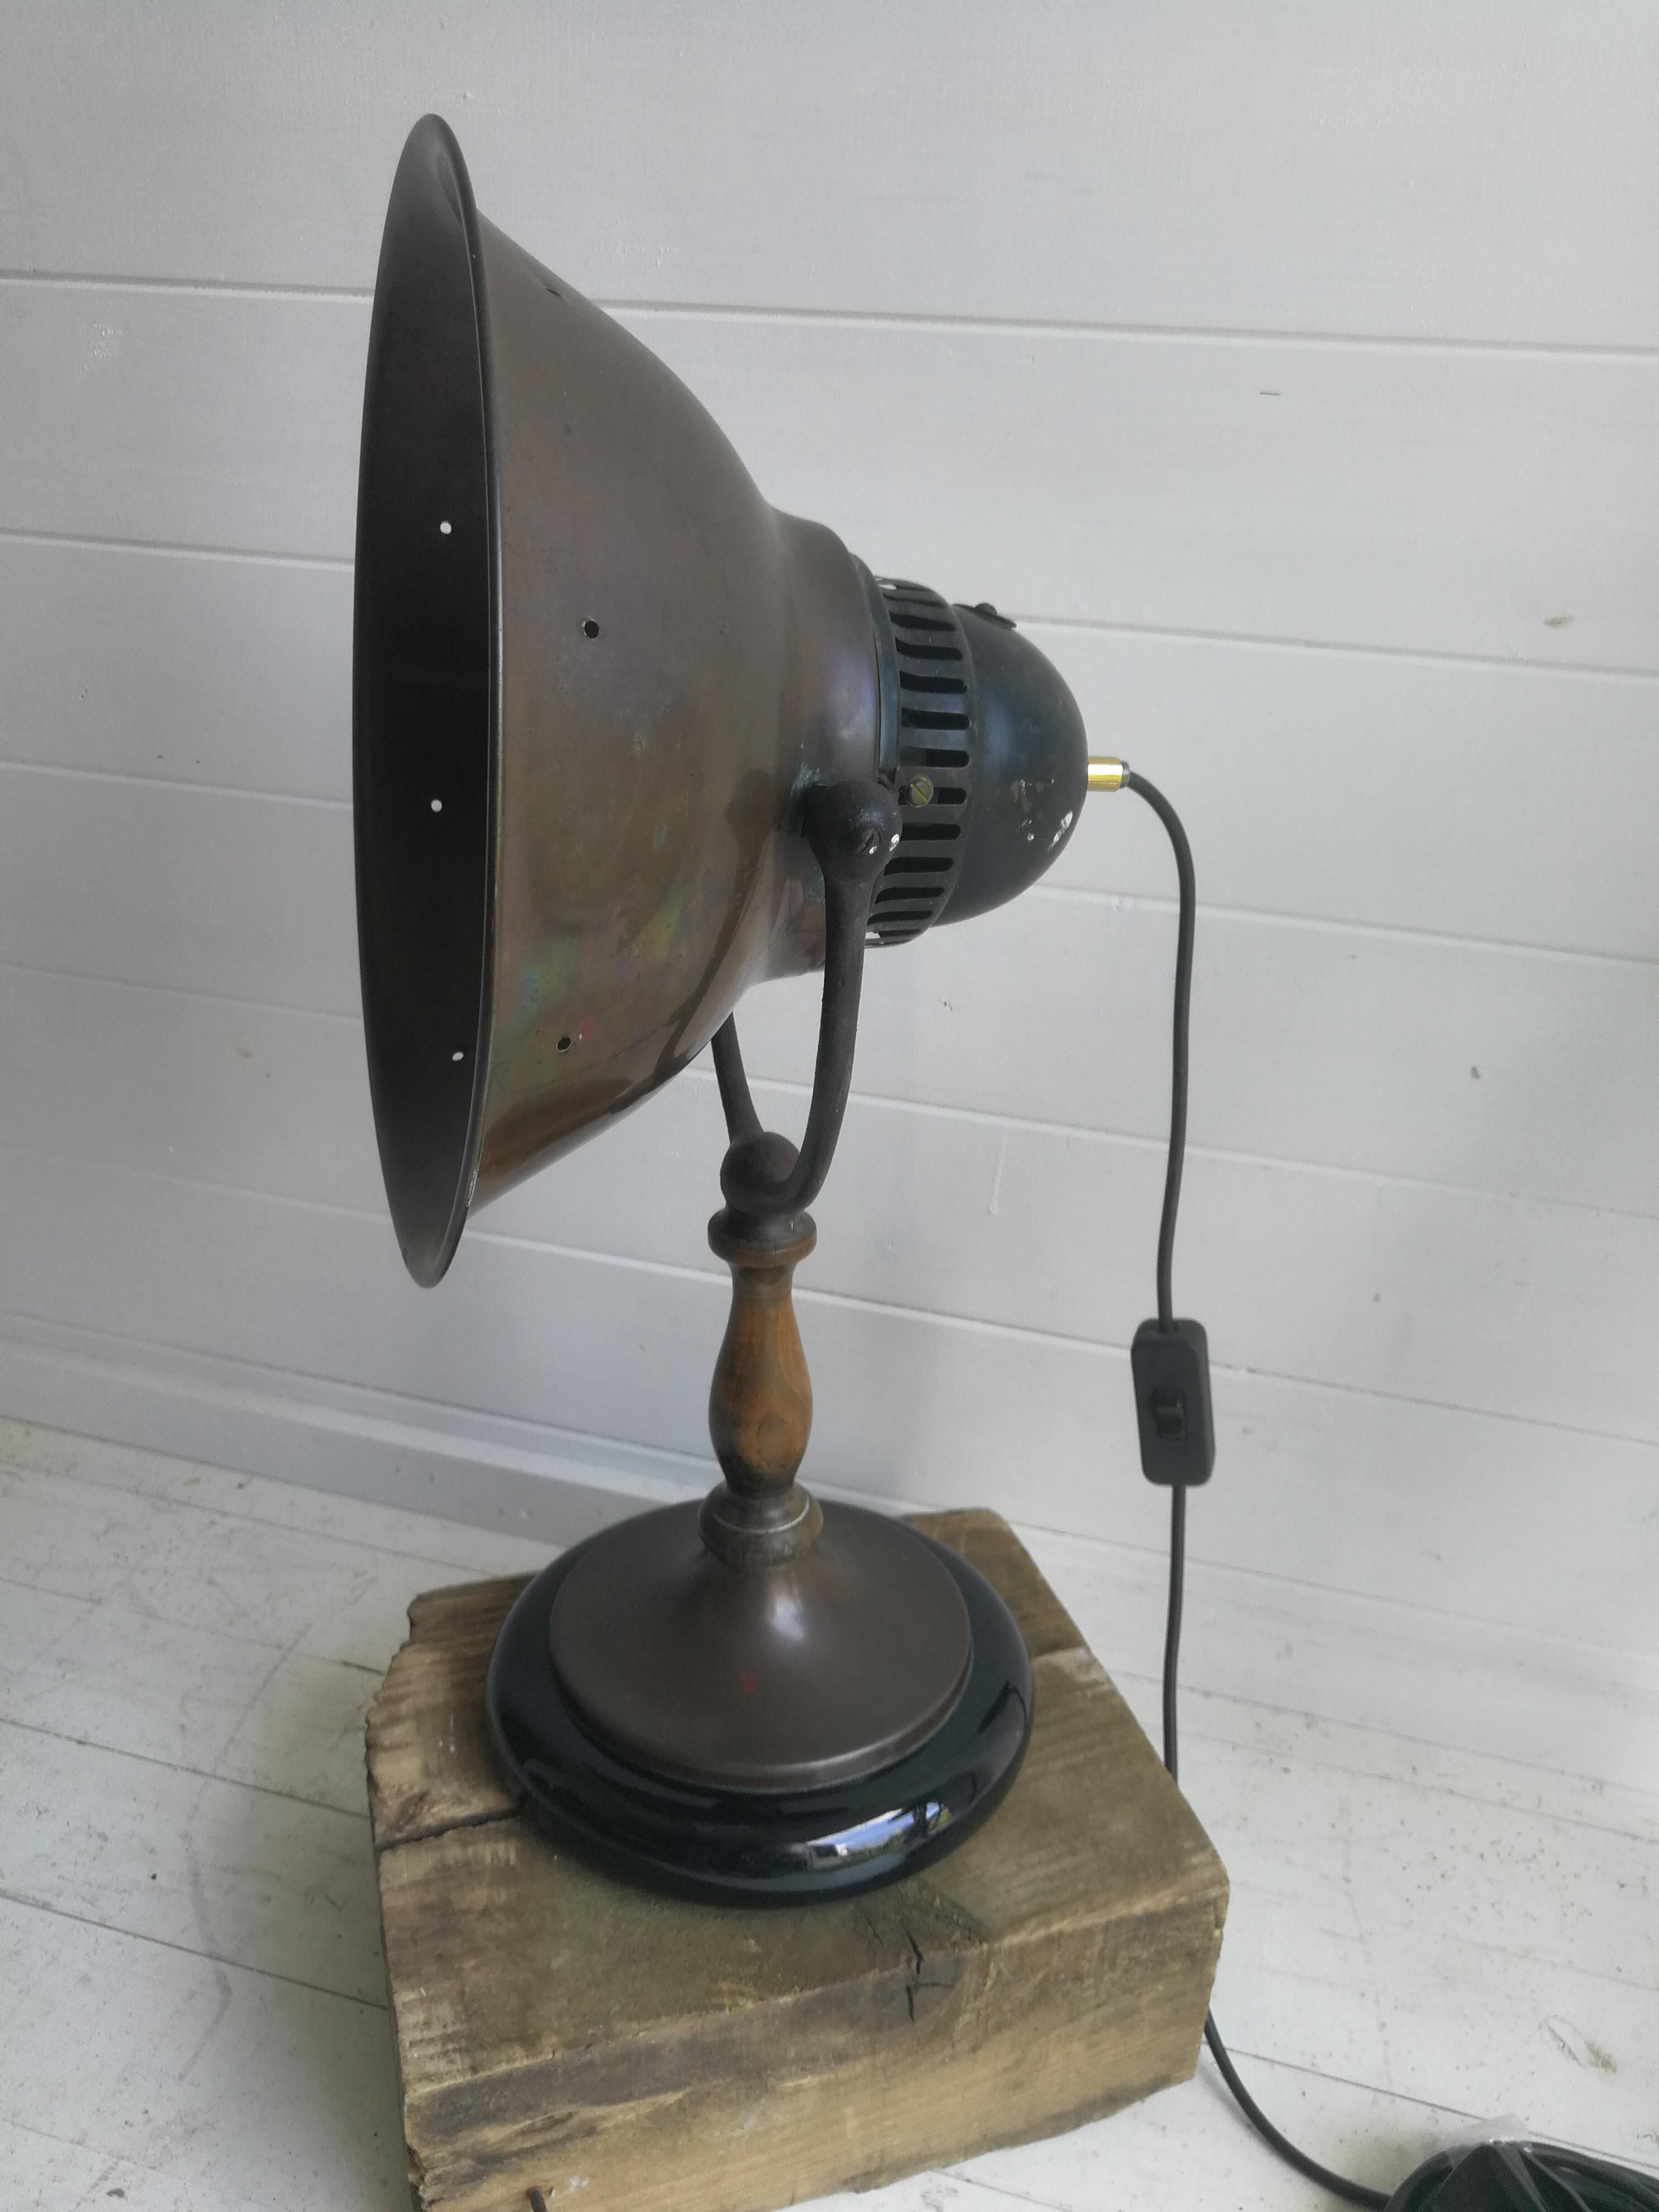 Very stylish copper heat lamp.

Vintage copper heat lamp country house industrial/steampunk table/light

Converted early 20th century heat lamp it is now a very able
piece of lighting & rare practical/usable antique.
Has survived remarkably